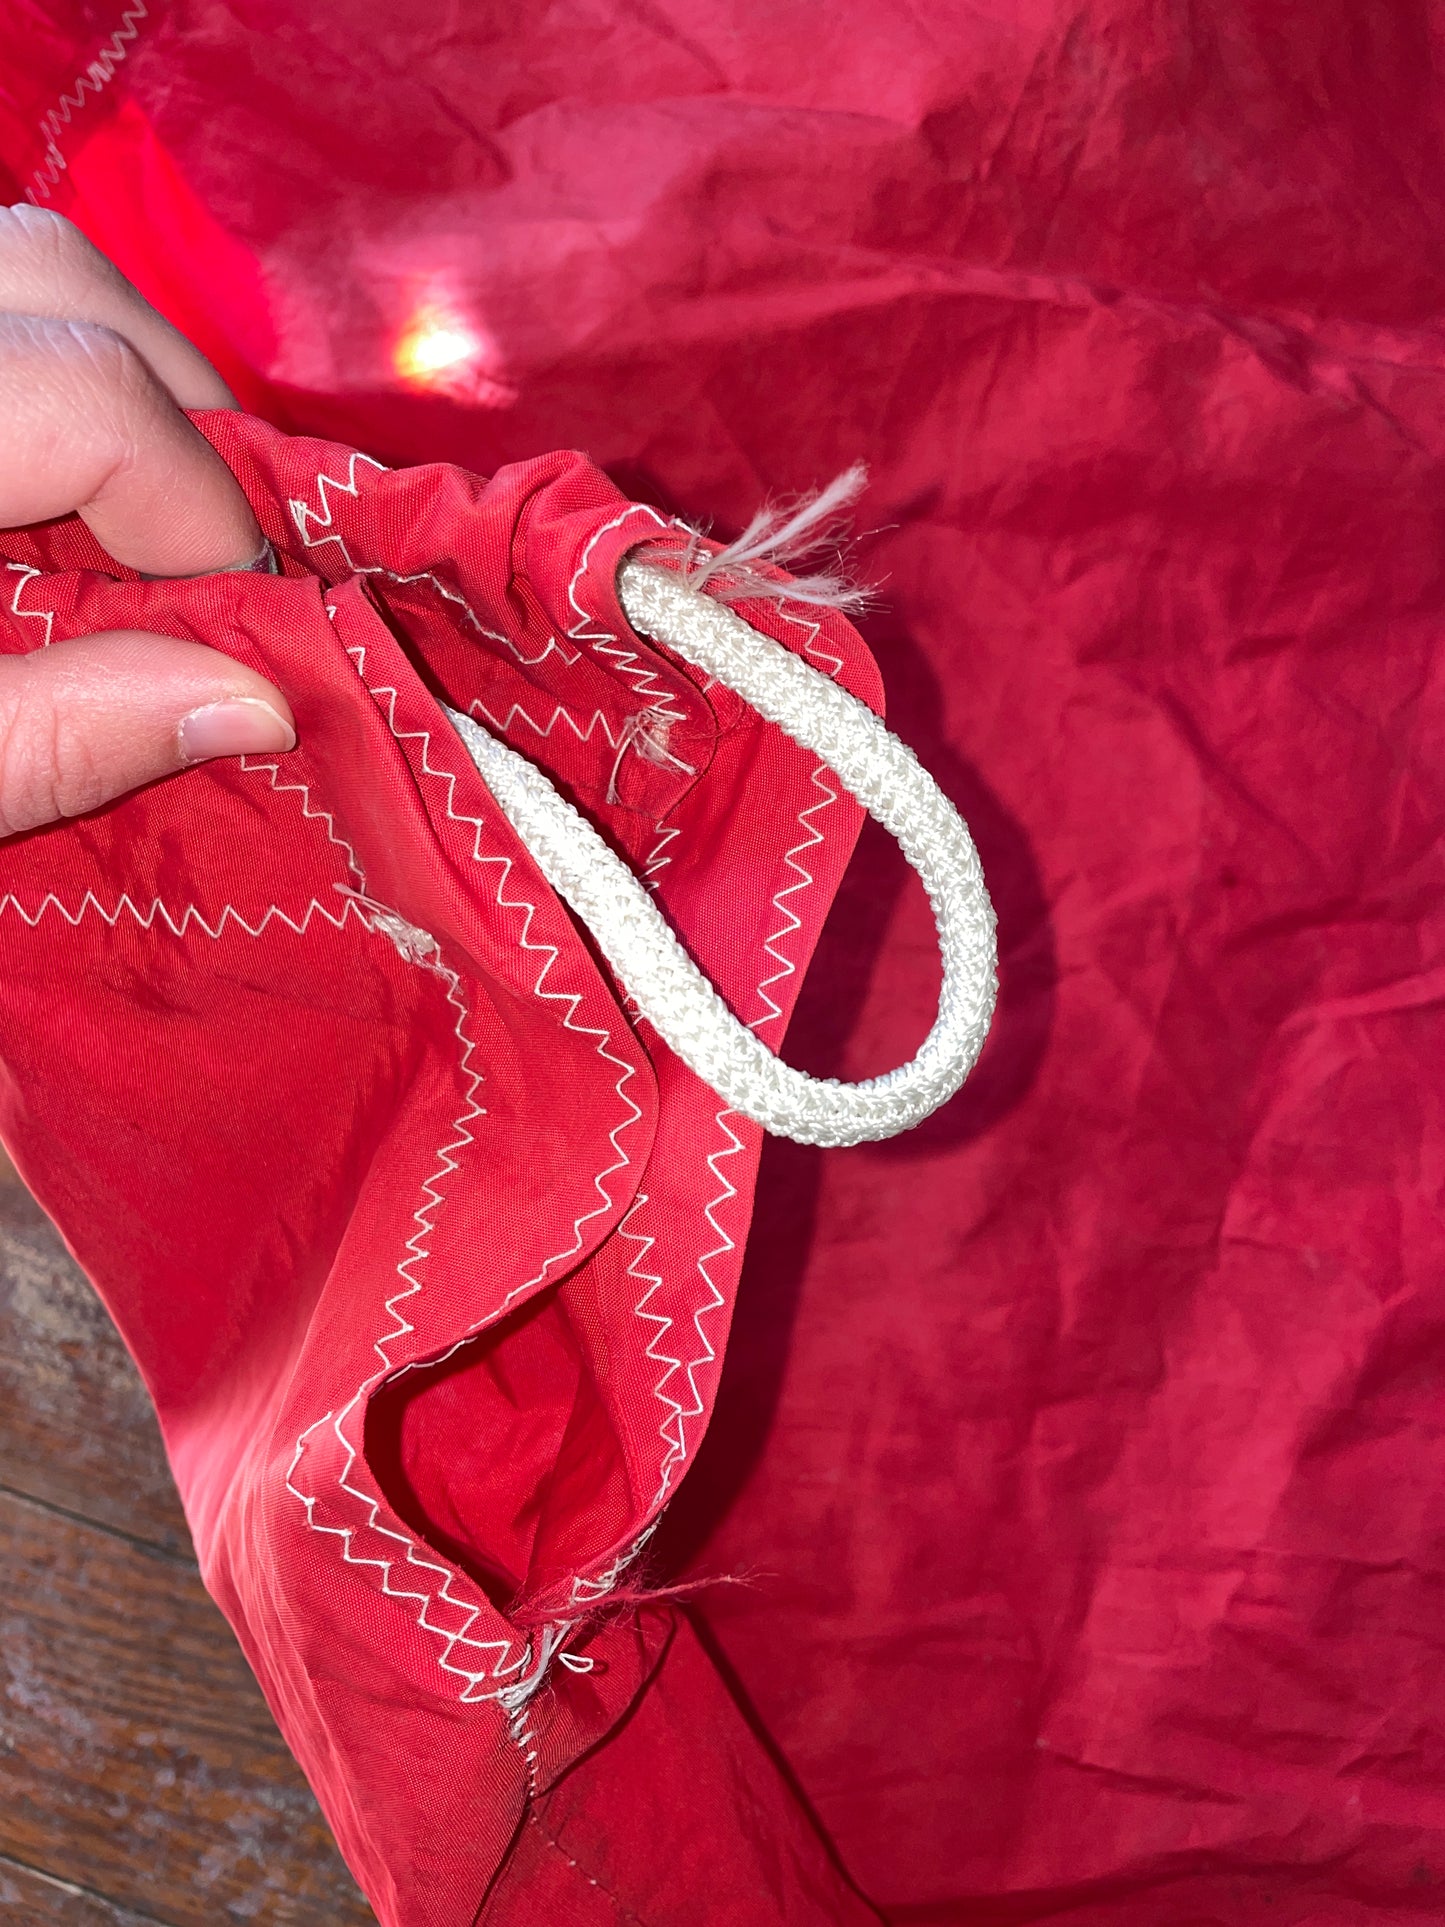 Red Sail Bag- 48” Long x 36” Wide